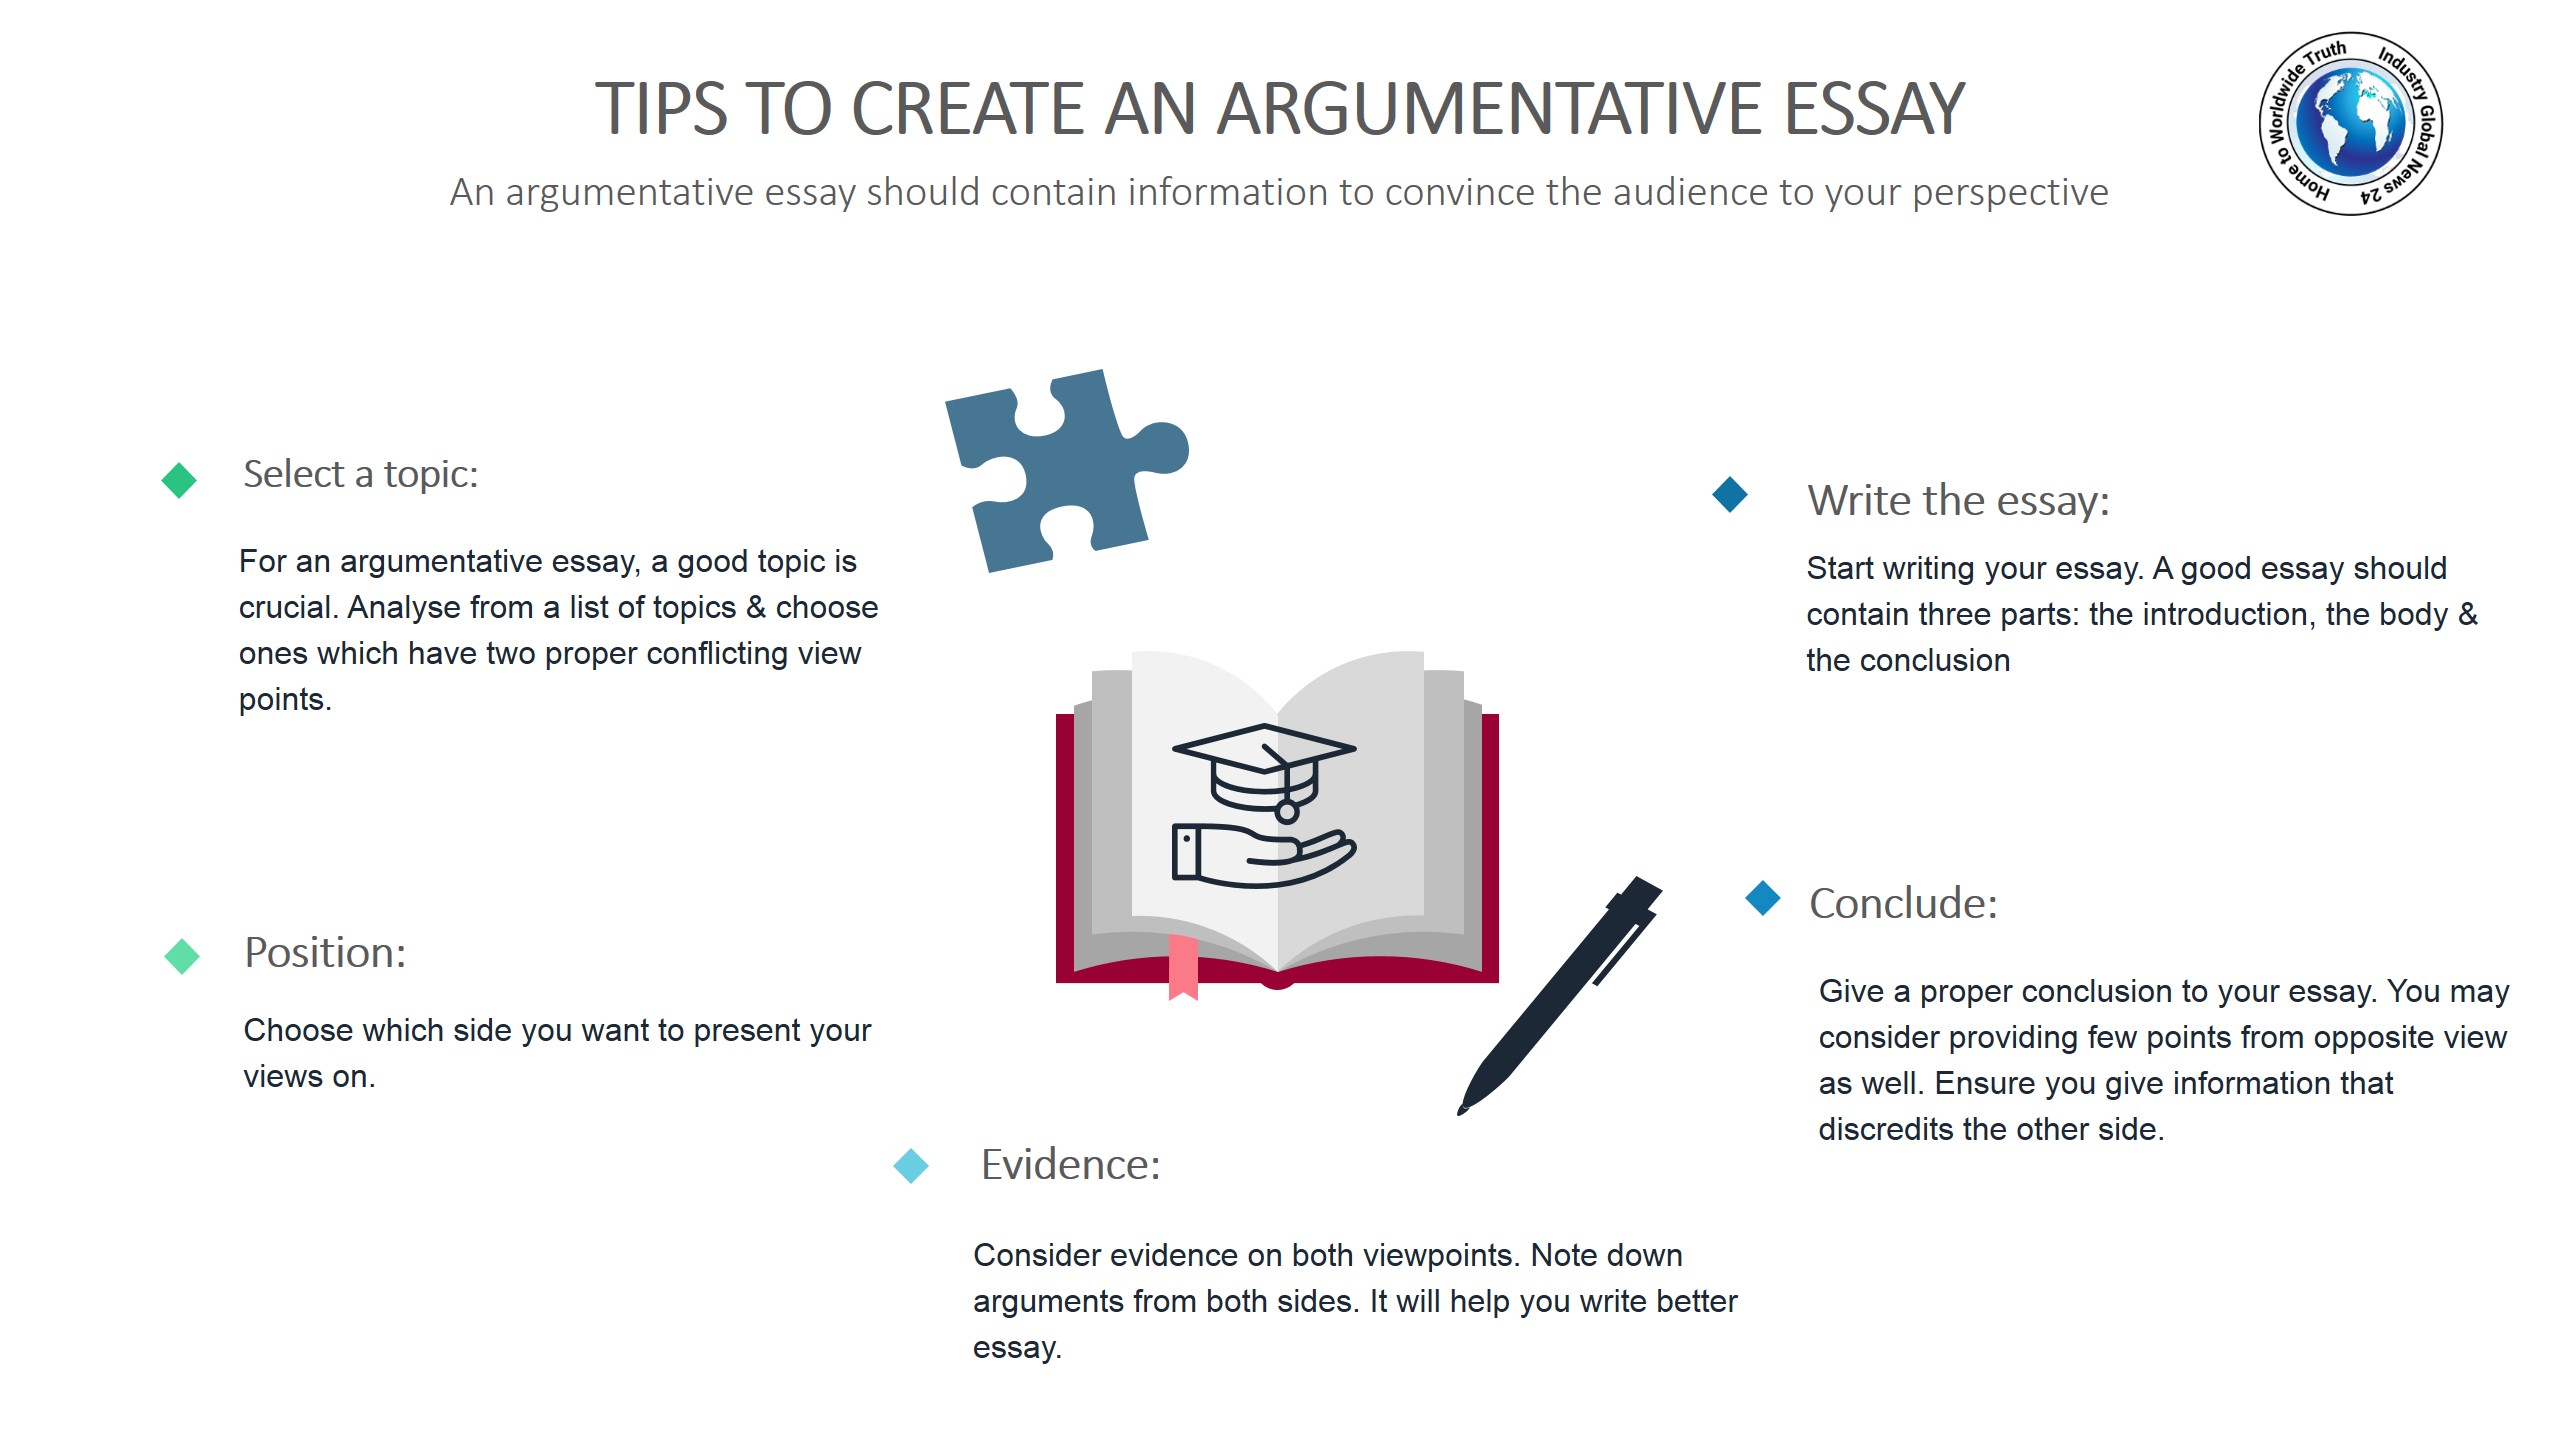 Tips to create an argumentative essay